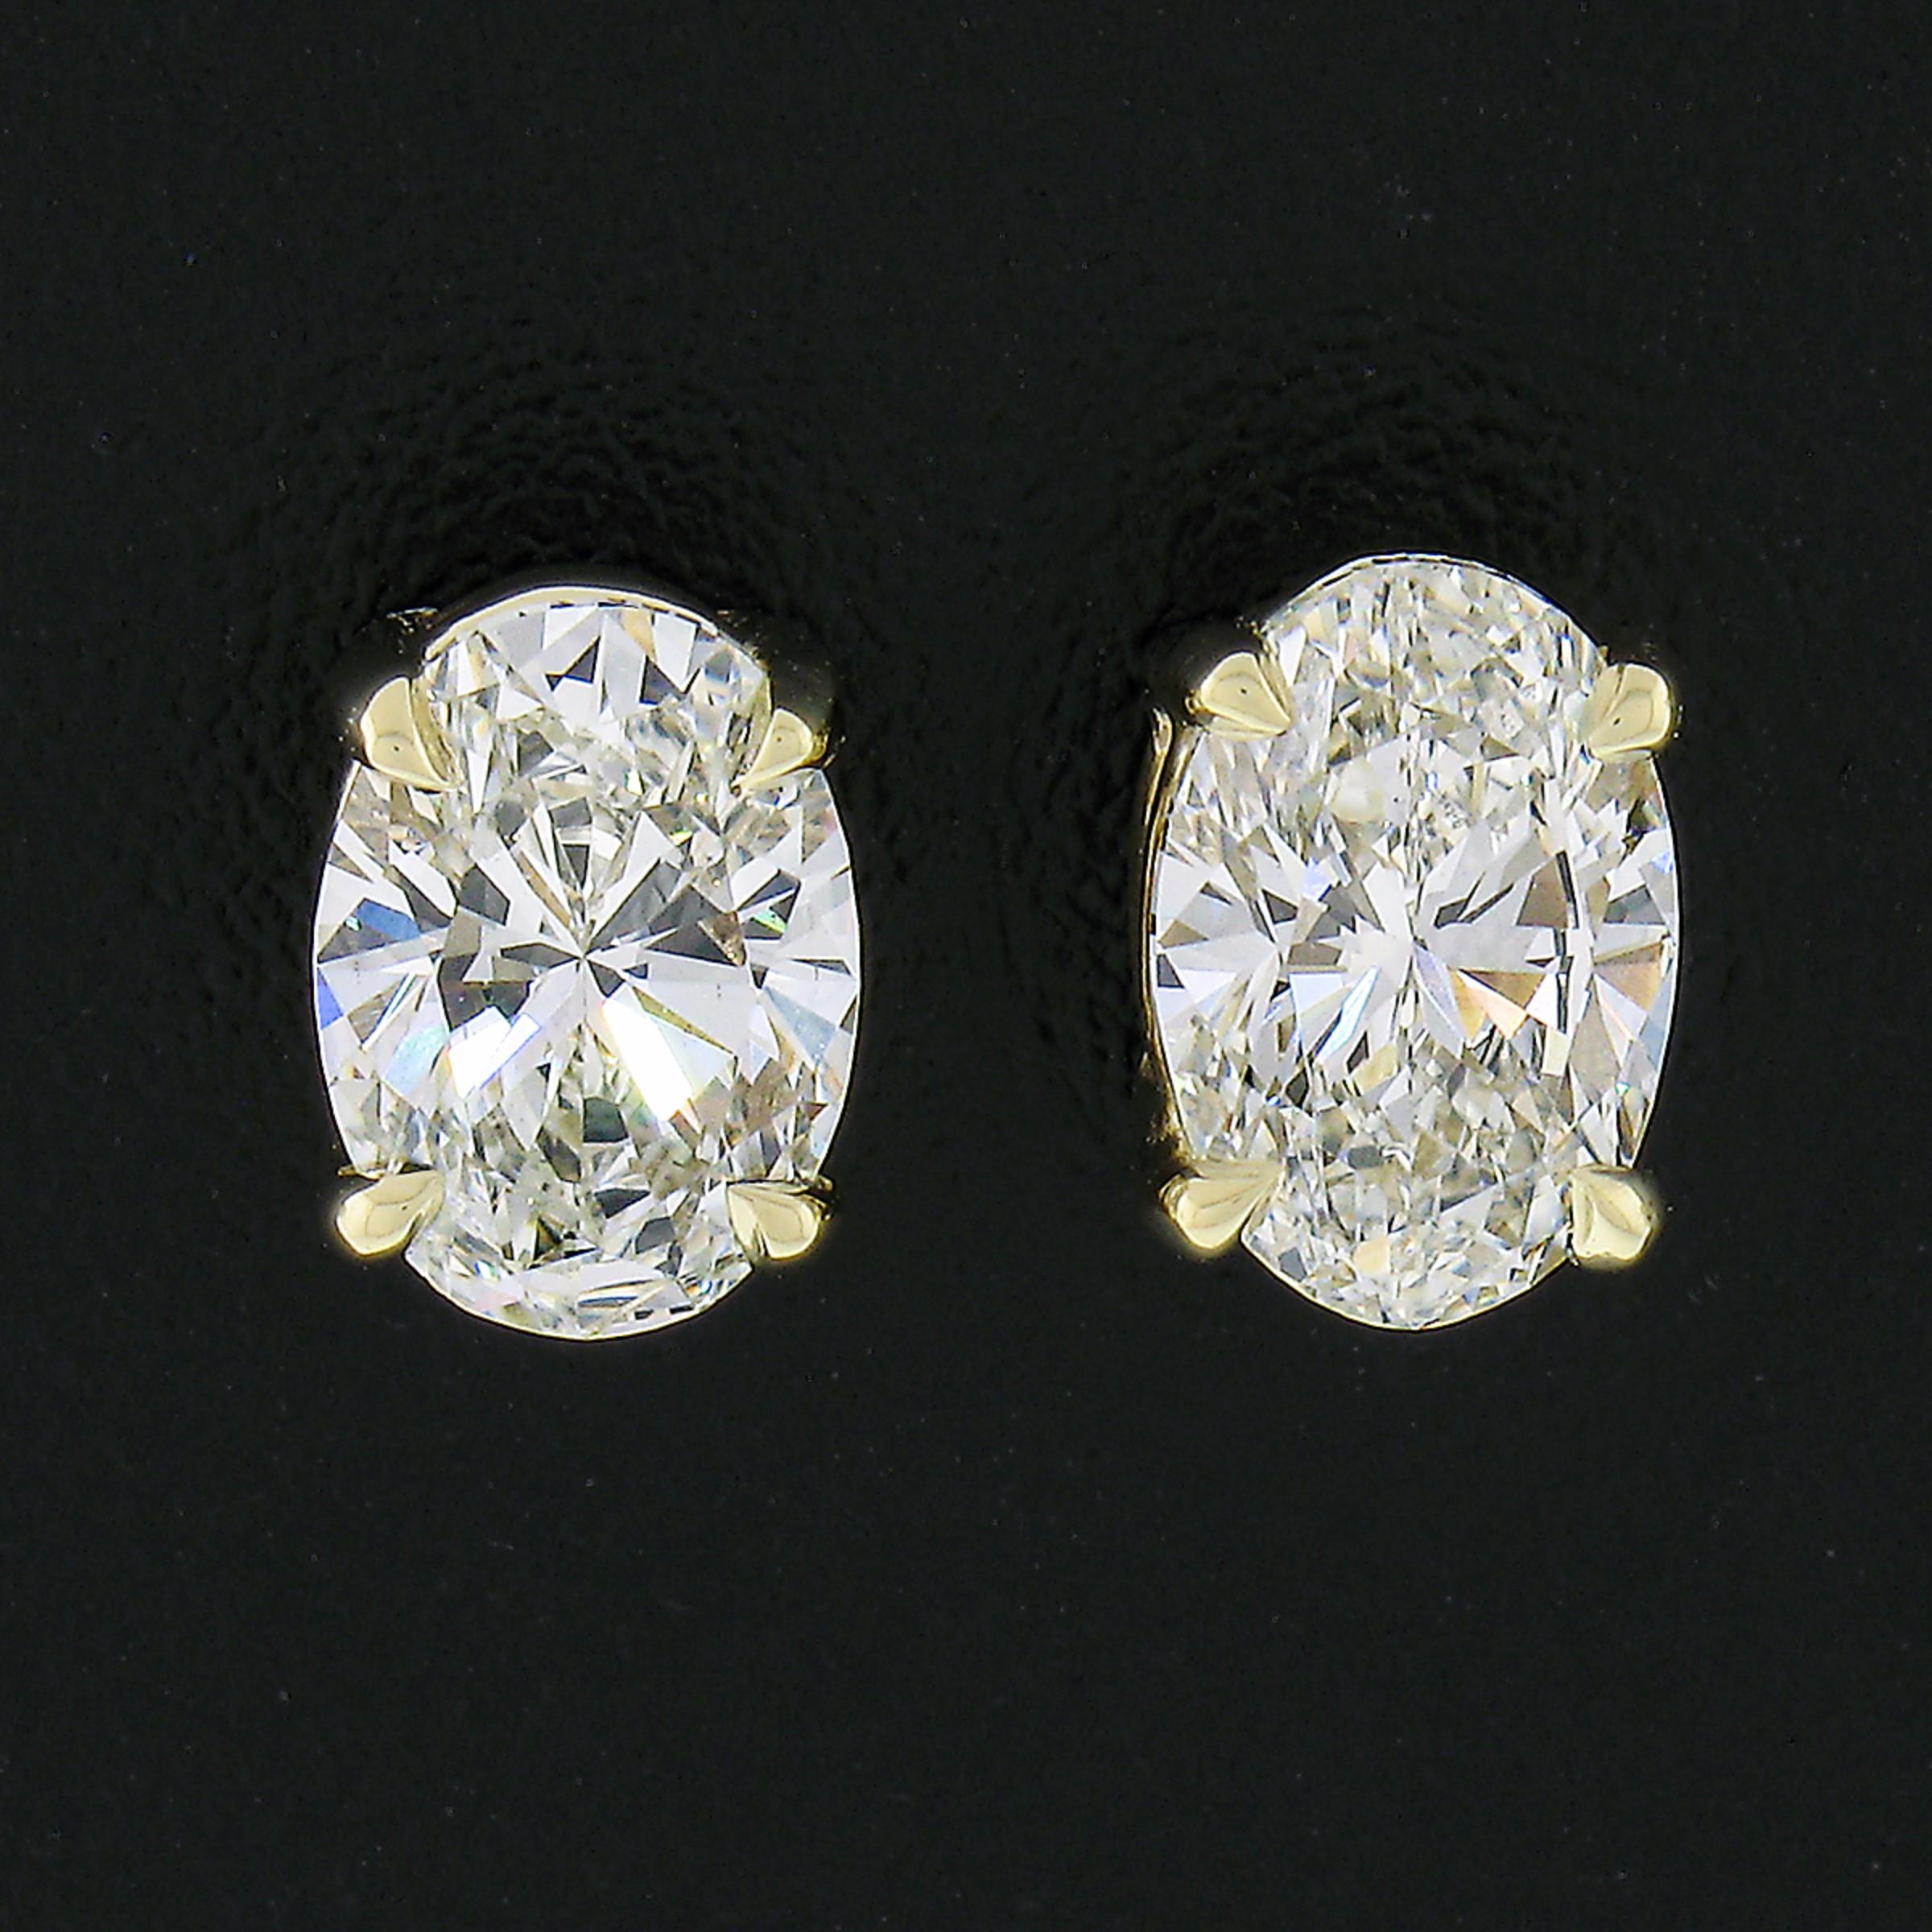 This magnificent pair of diamond stud earrings is newly crafted in solid 14k yellow gold and features two very fine quality oval brilliant cut diamonds. They are both individually GIA certified and total exactly 1.10 carats in weight. The fire and